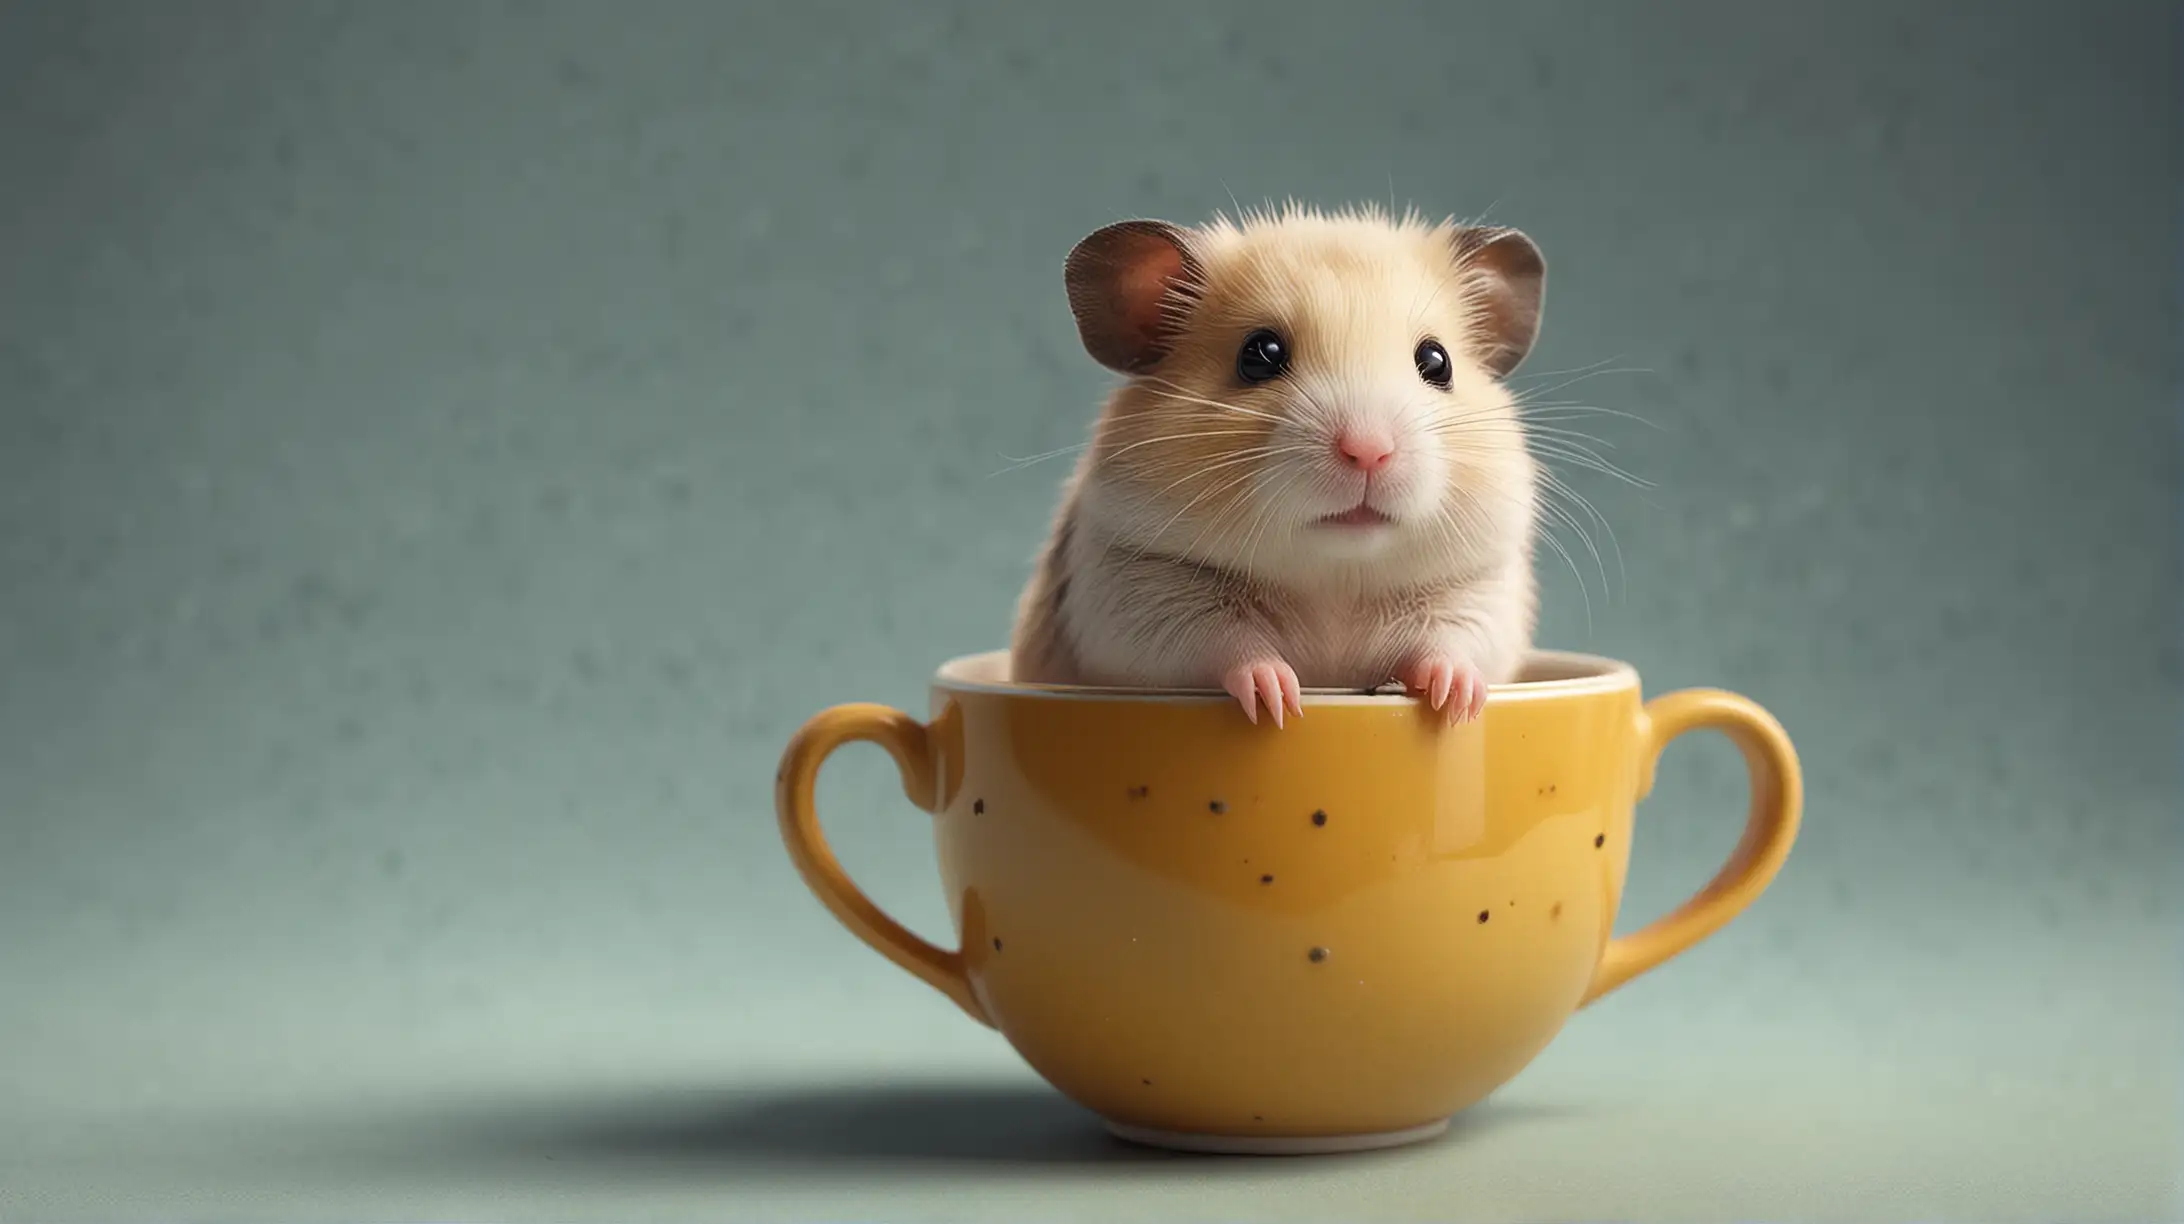 create a hyper realistic image of only one tiny cute hamster in a cup 